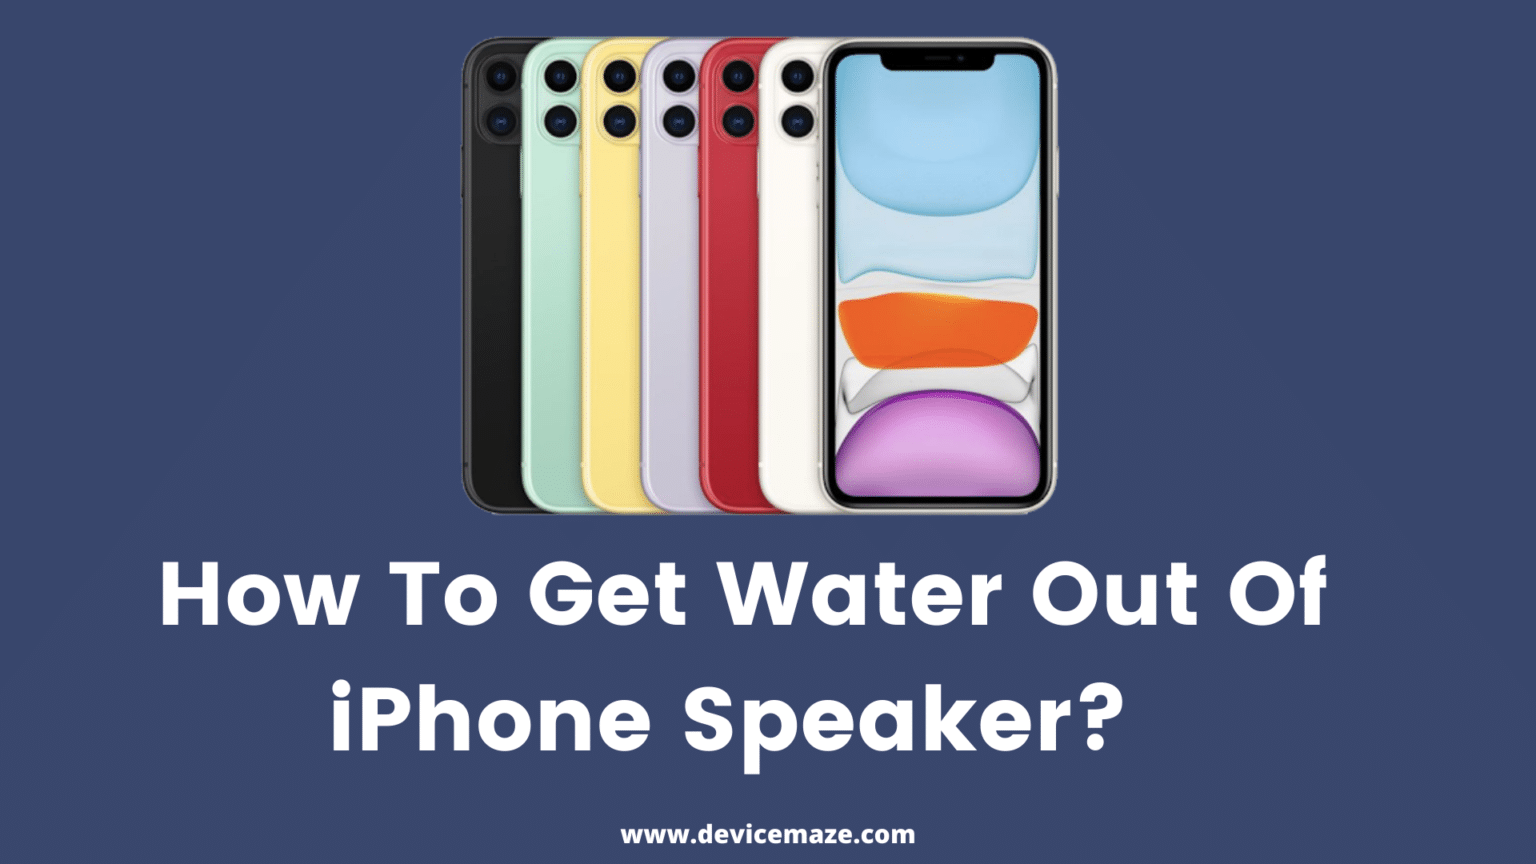 How To Get Water Out Of iPhone Speaker Without Rice?